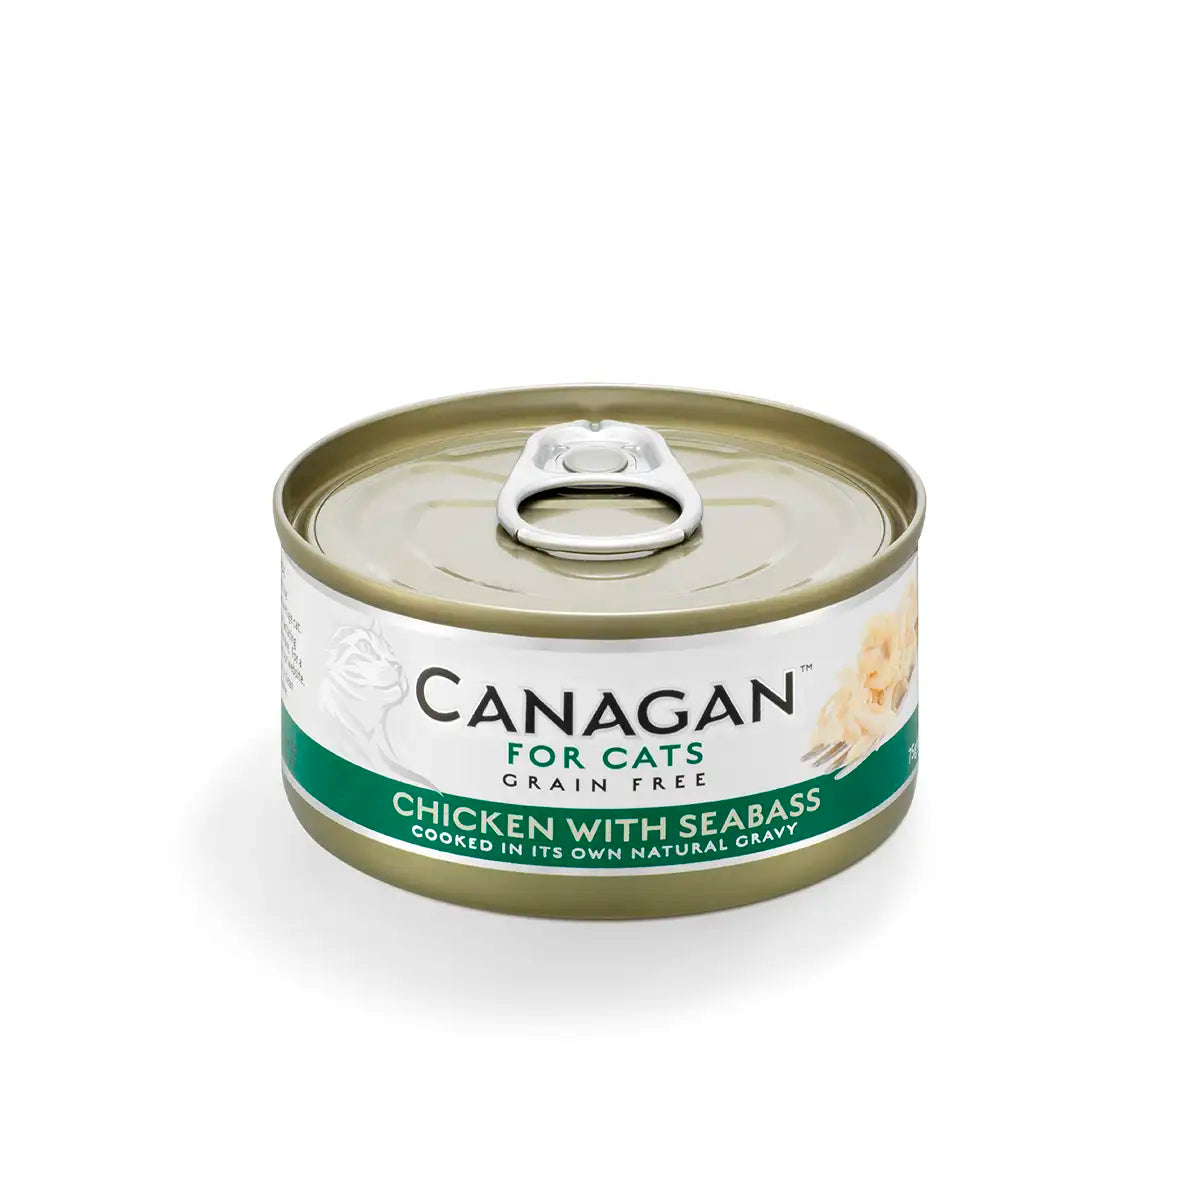 Canagan Cat Canned Food Chicken With Seabass 75g